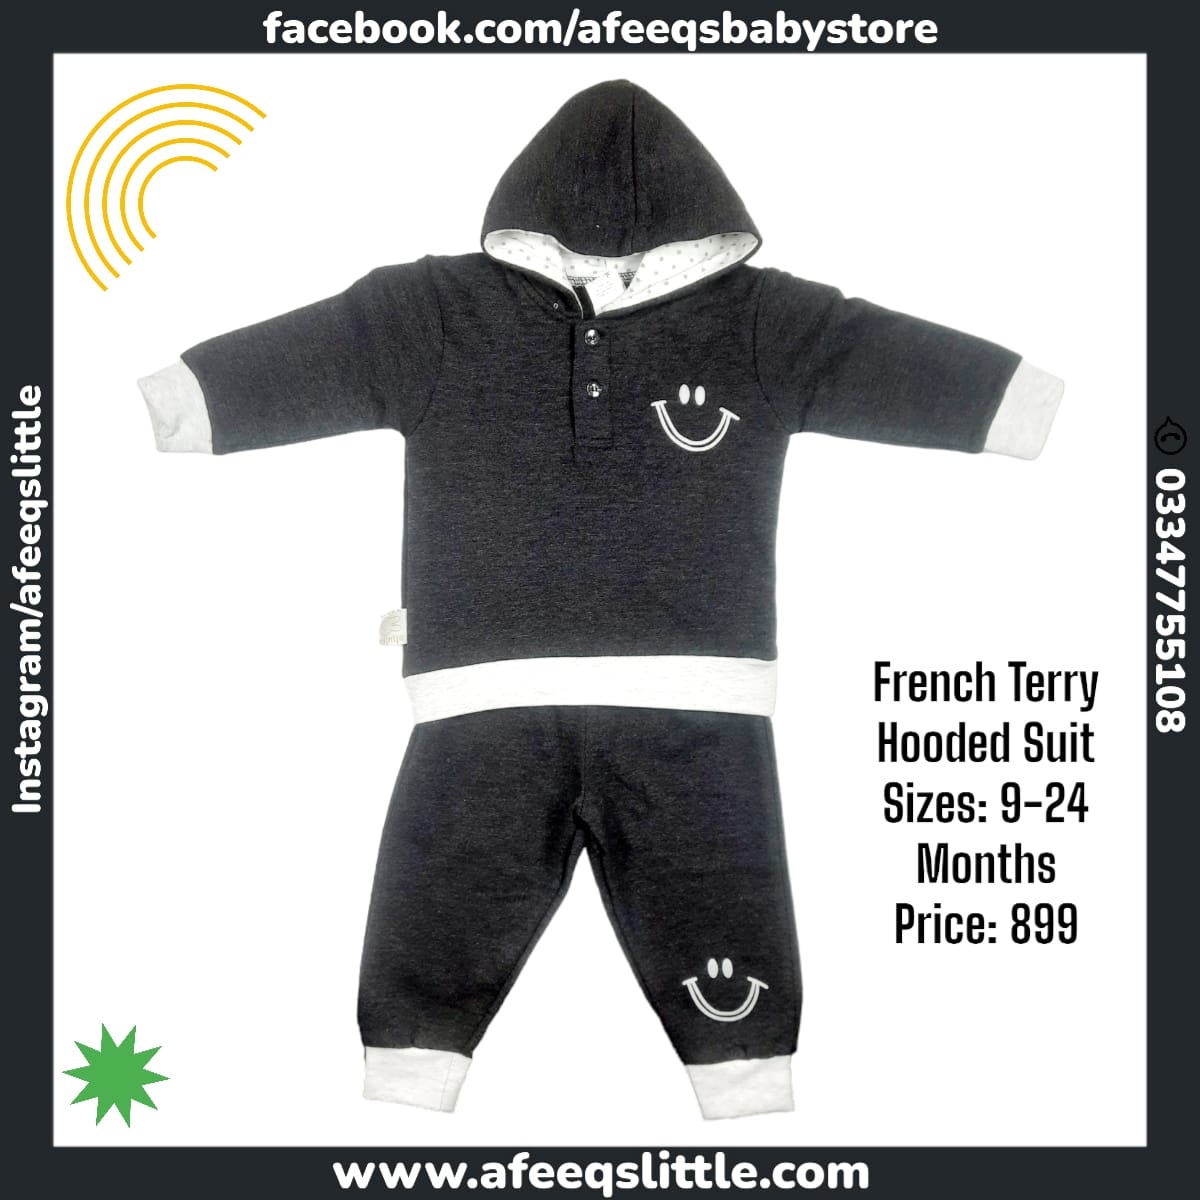 Warm Winter Thermal Night Suit, Afeeqs Little